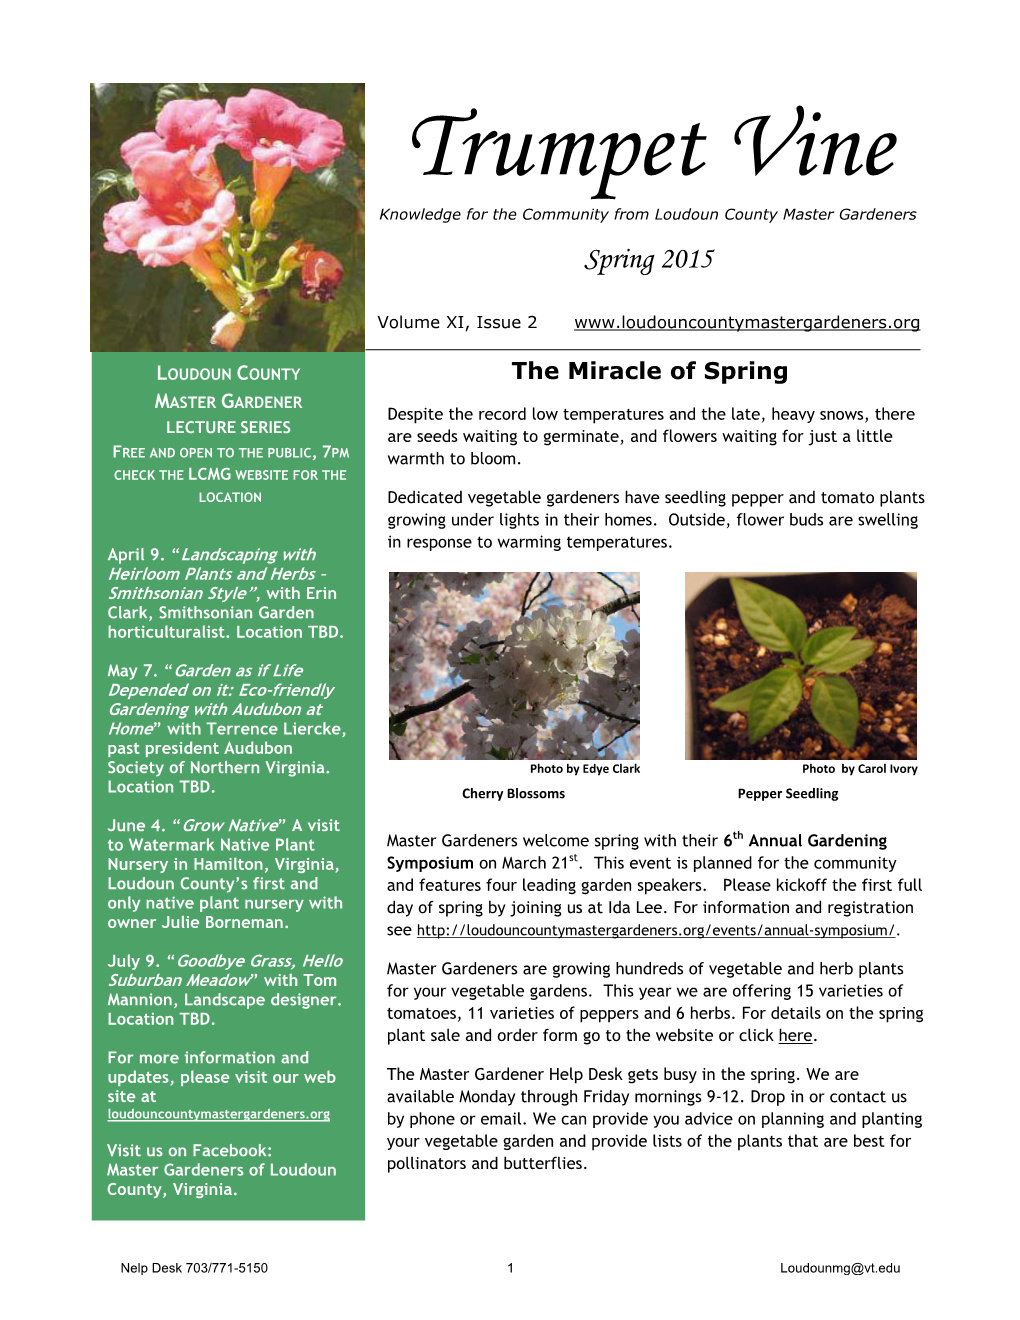 Trumpet Vine Knowledge for the Community from Loudoun County Master Gardeners Spring 2015